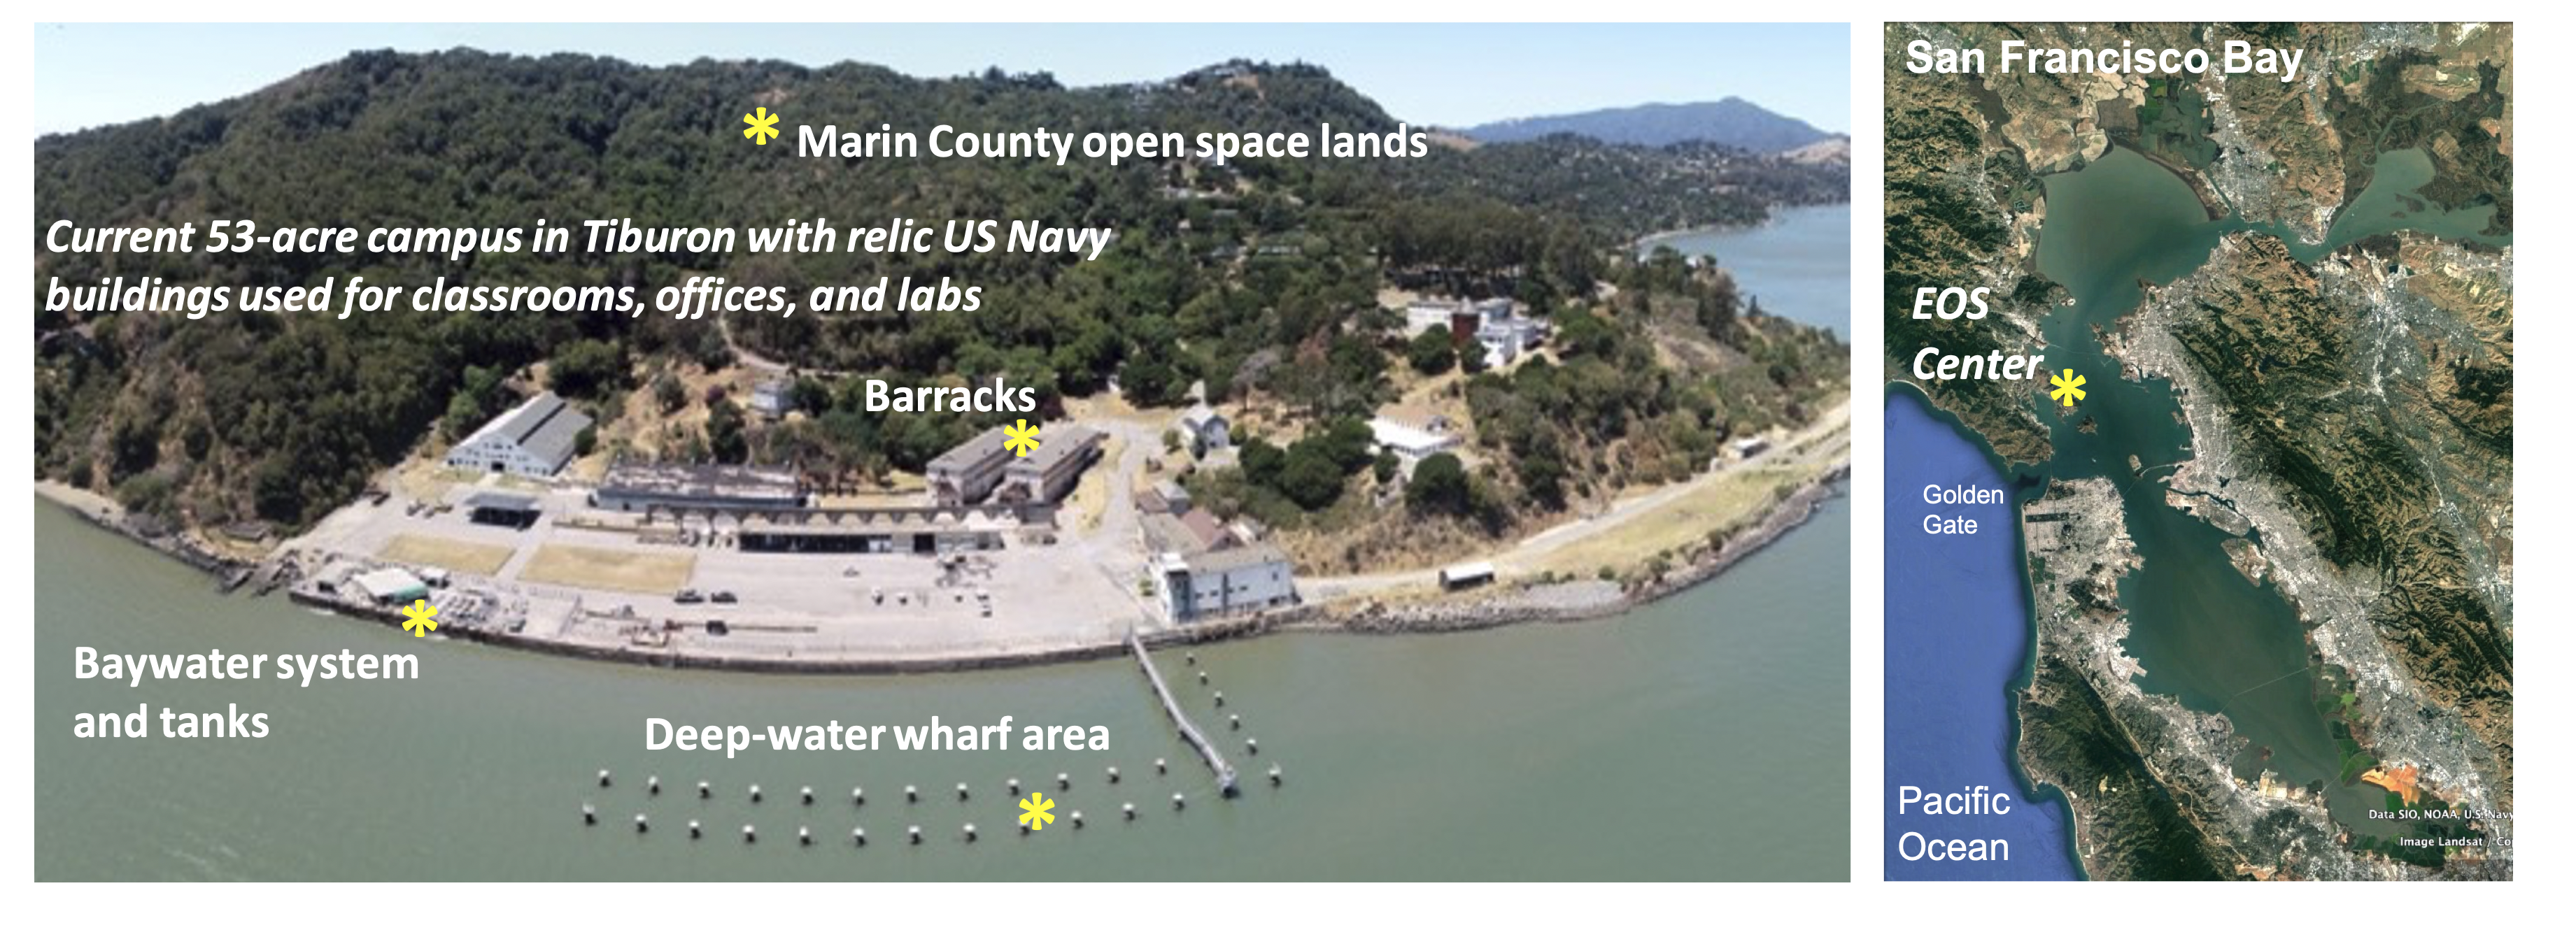 aerial site and map of sf bay